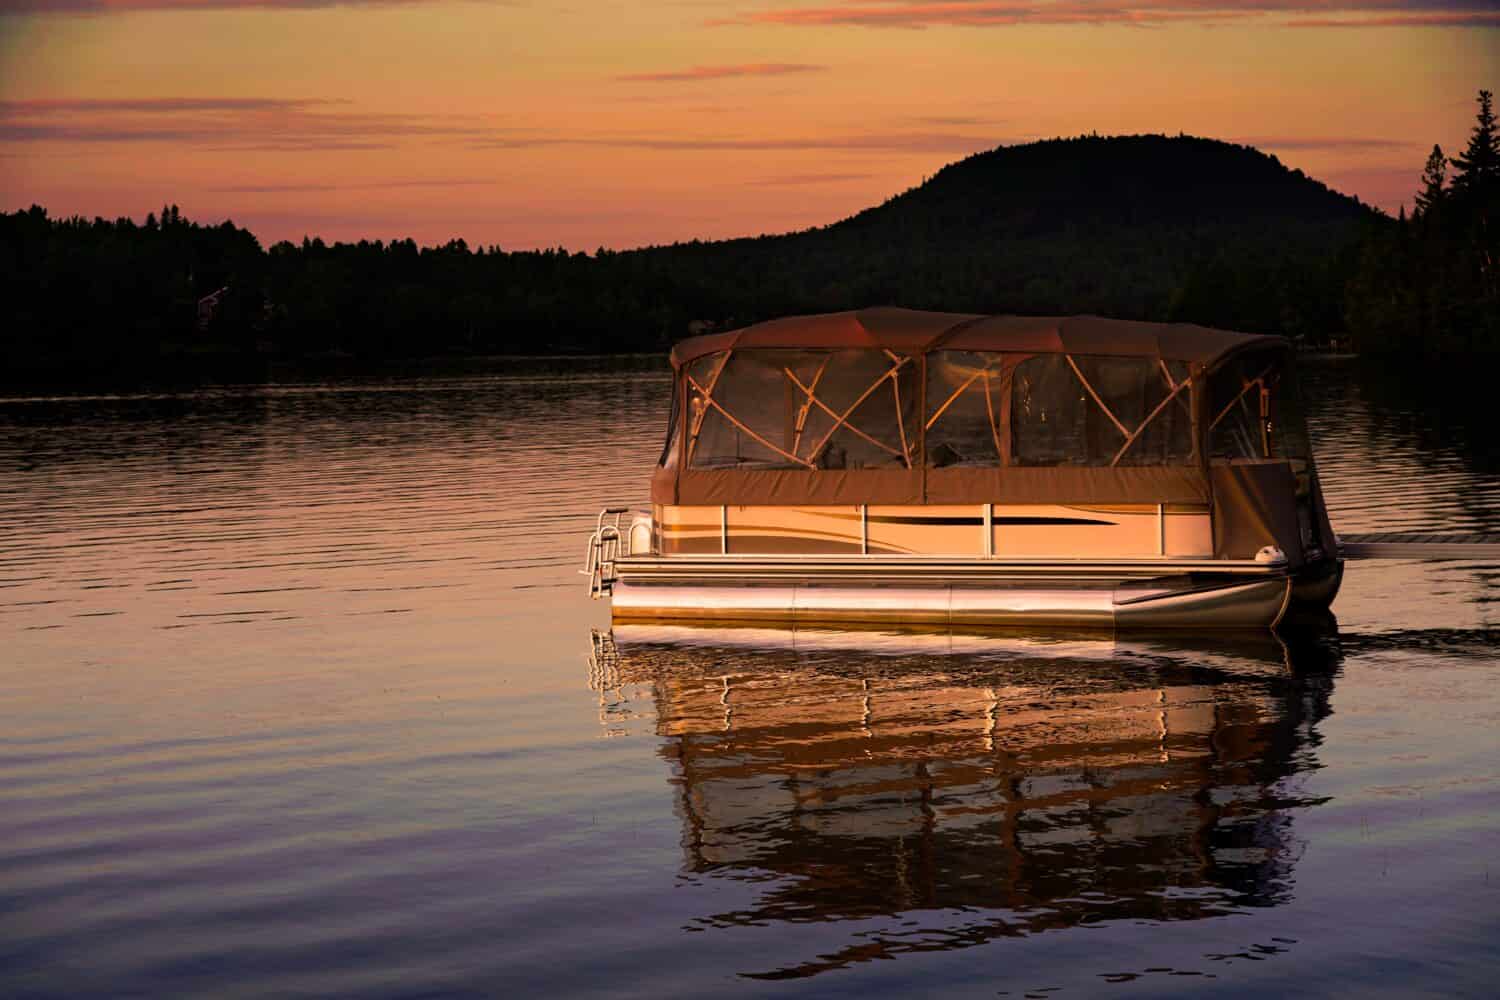 A picture of a pontoon boat on lake with a evening sunset